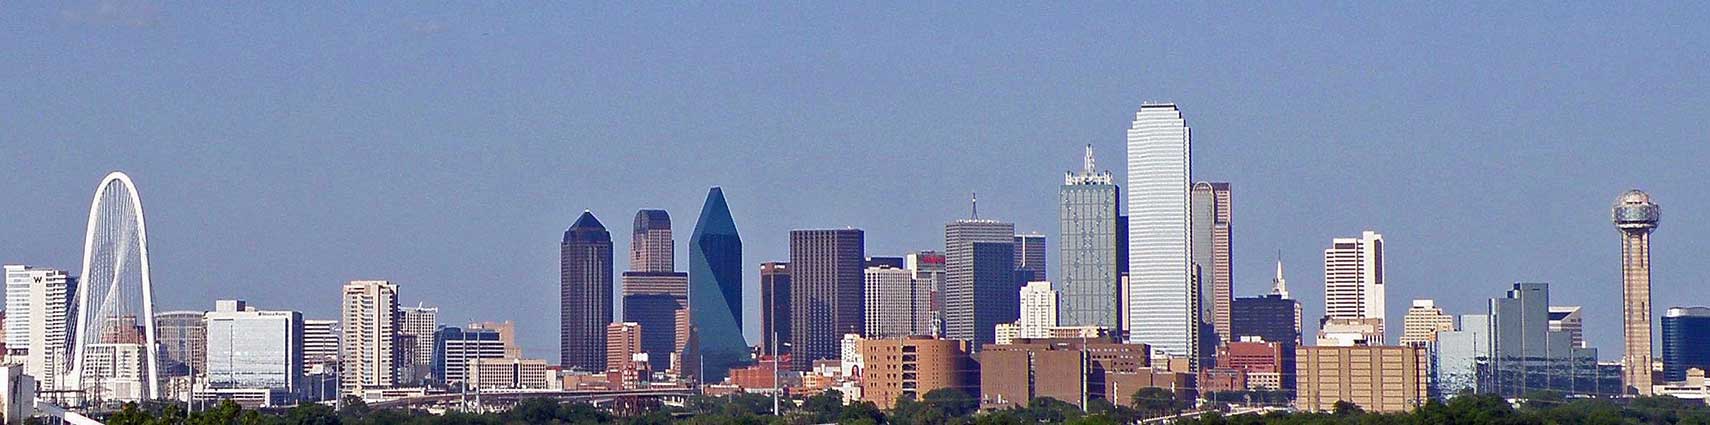 Google Map of the City of Dallas, Texas, USA - Nations Online Project